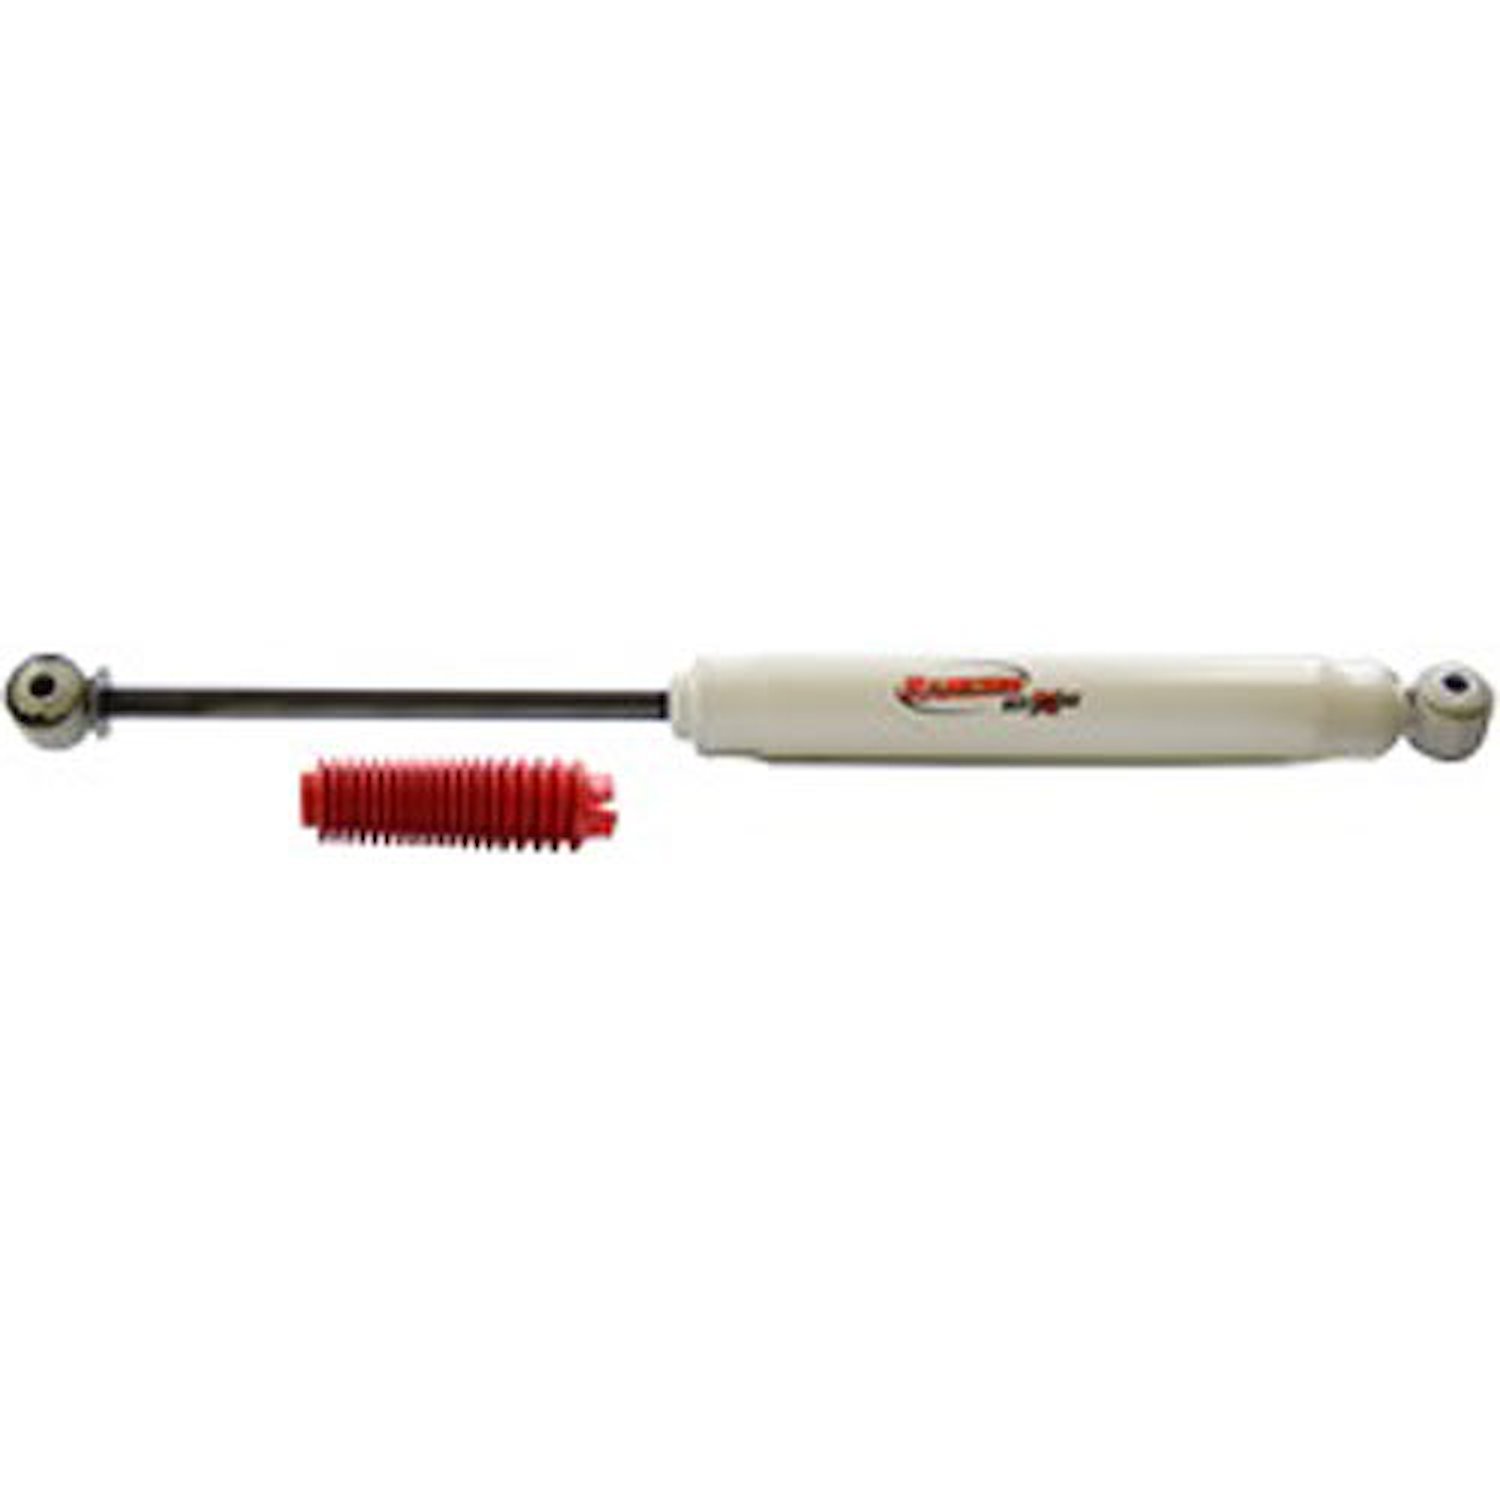 RS5000X Rear Shock Absorber Fits Ford F150